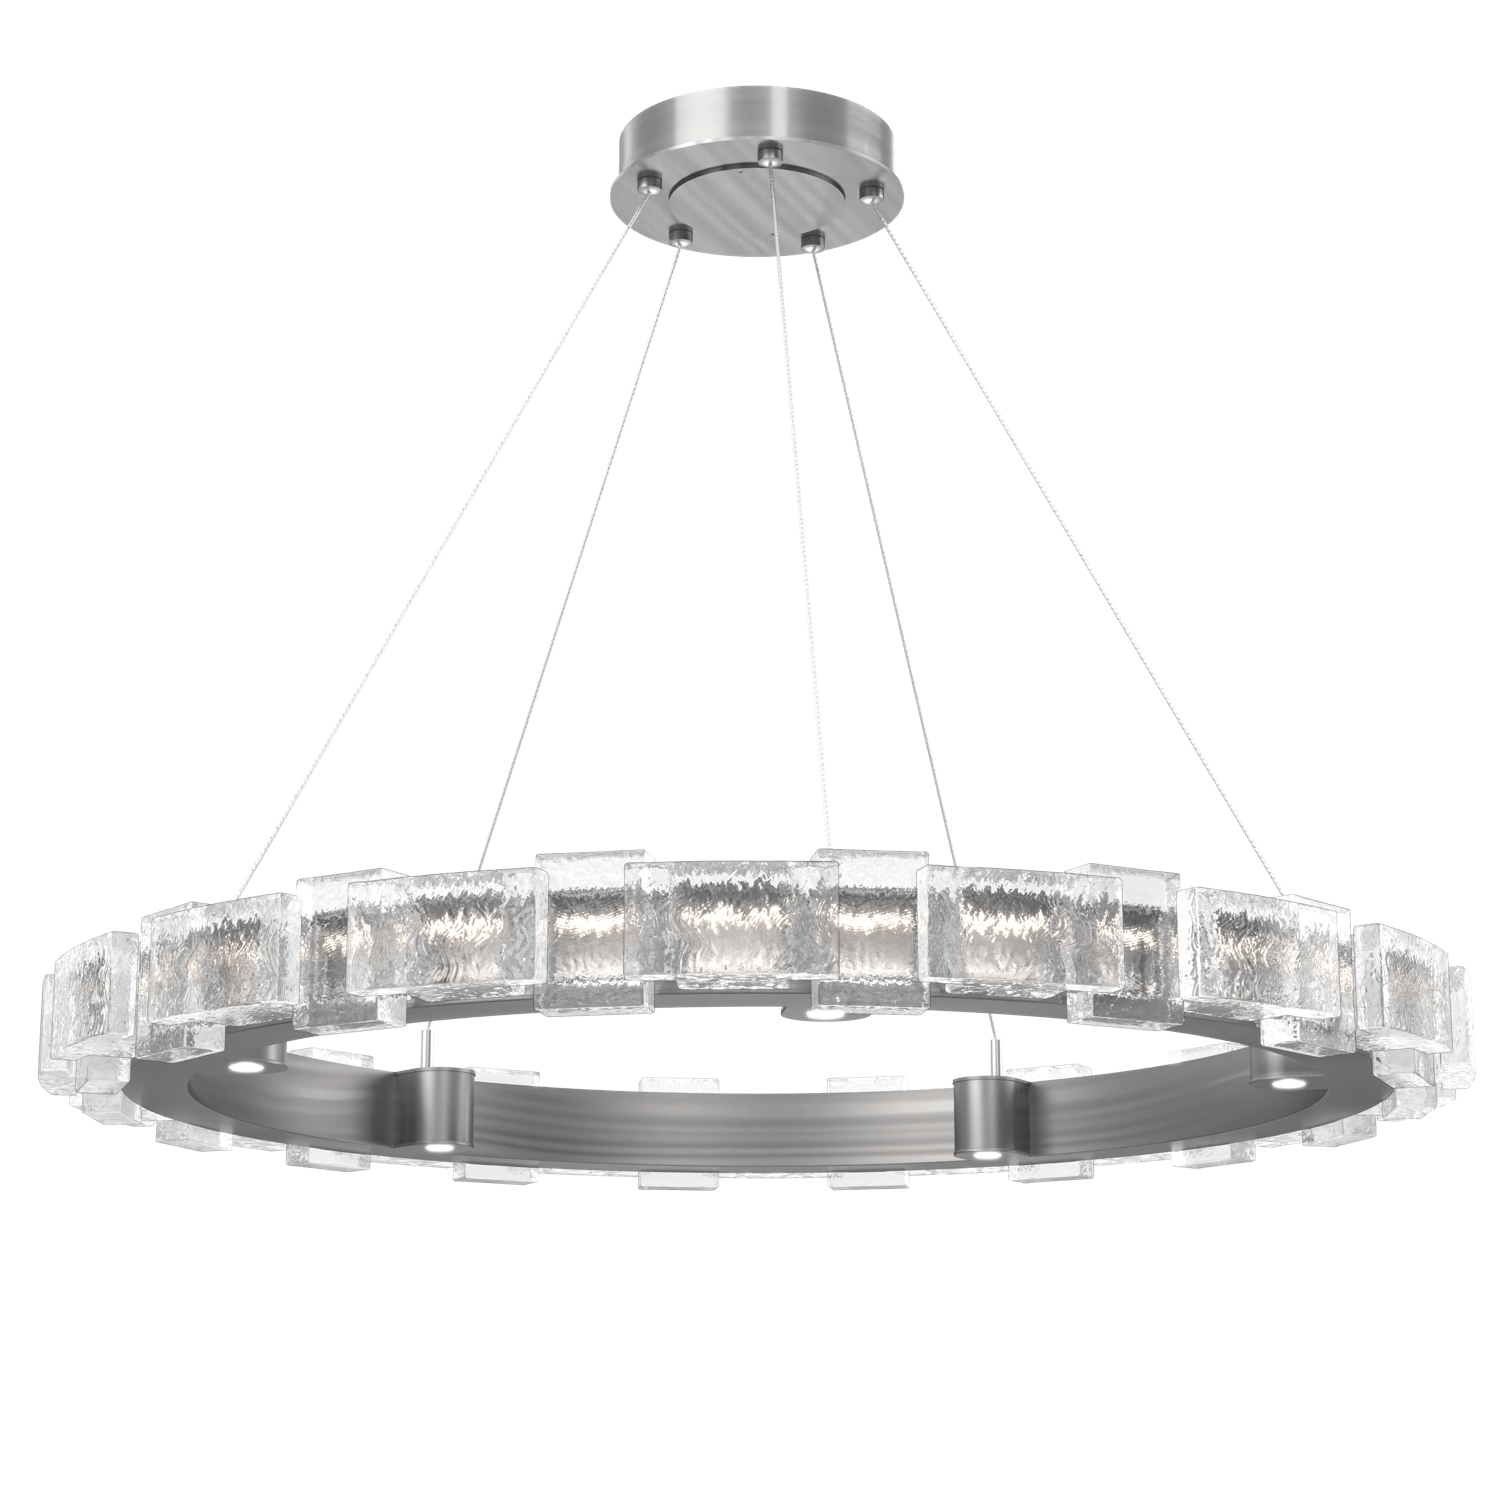 CHB0087-38-SN-TE-Hammerton-Studio-Tessera-38-inch-ring-chandelier-with-satin-nickel-finish-and-clear-tetro-cast-glass-shade-and-LED-lamping